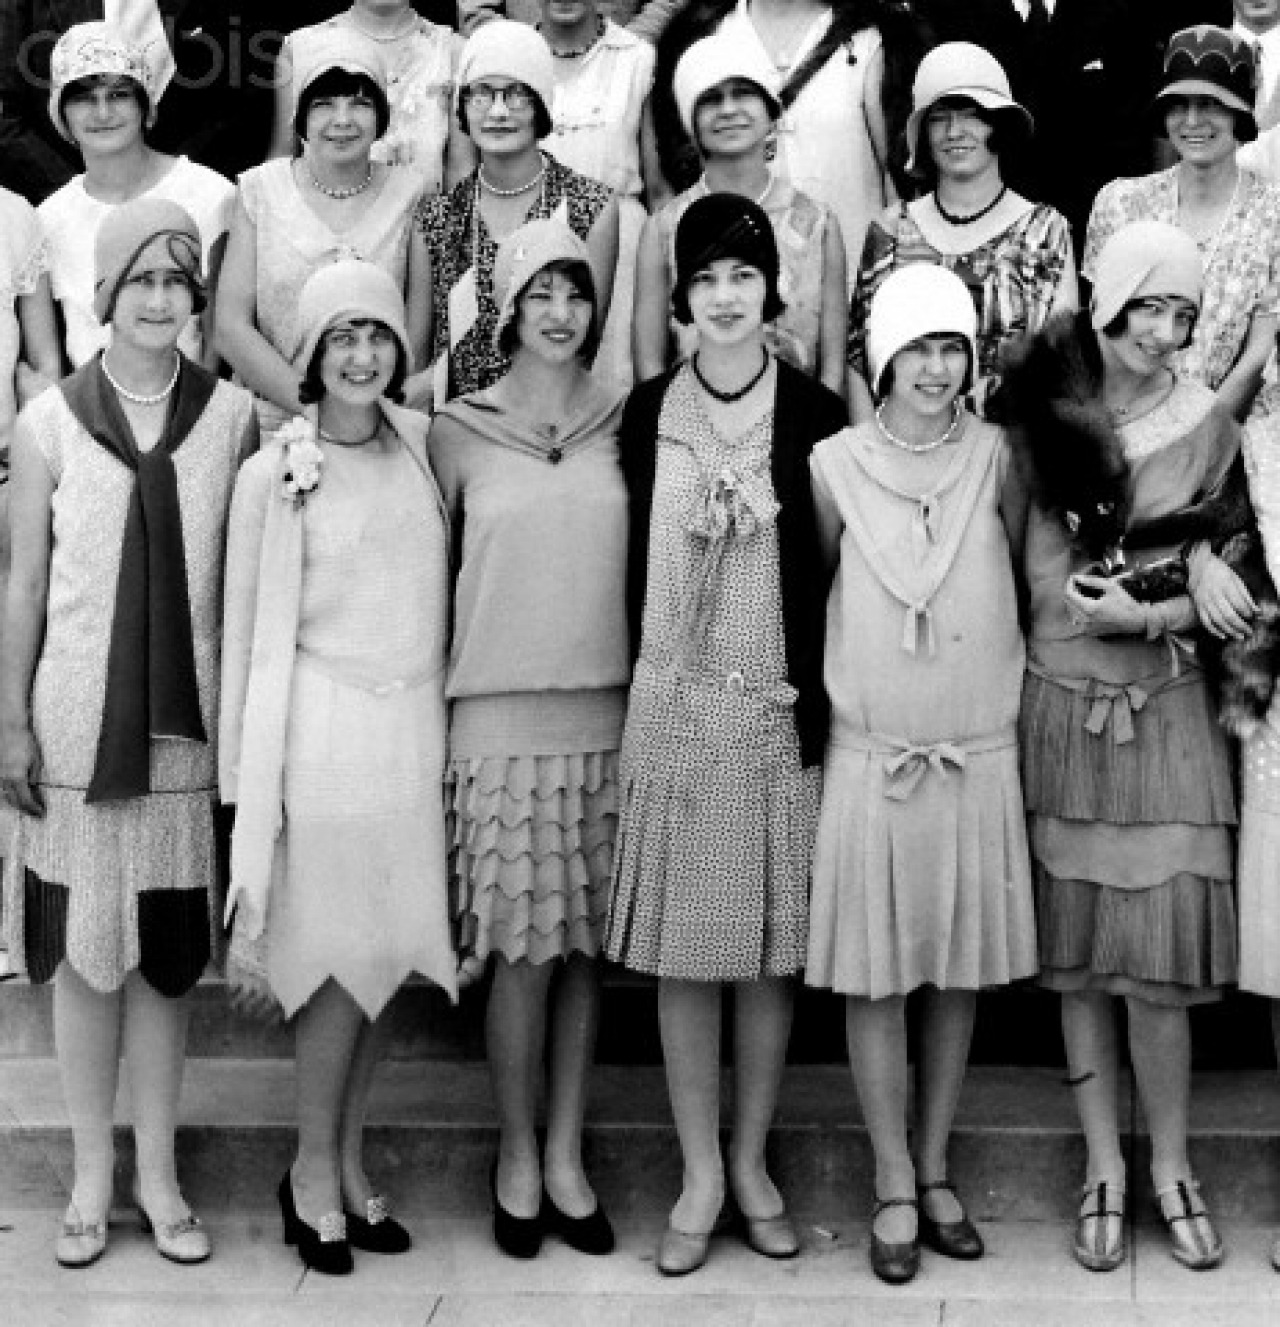 Womens fashion from the 1920s by designer Augusta Bernard